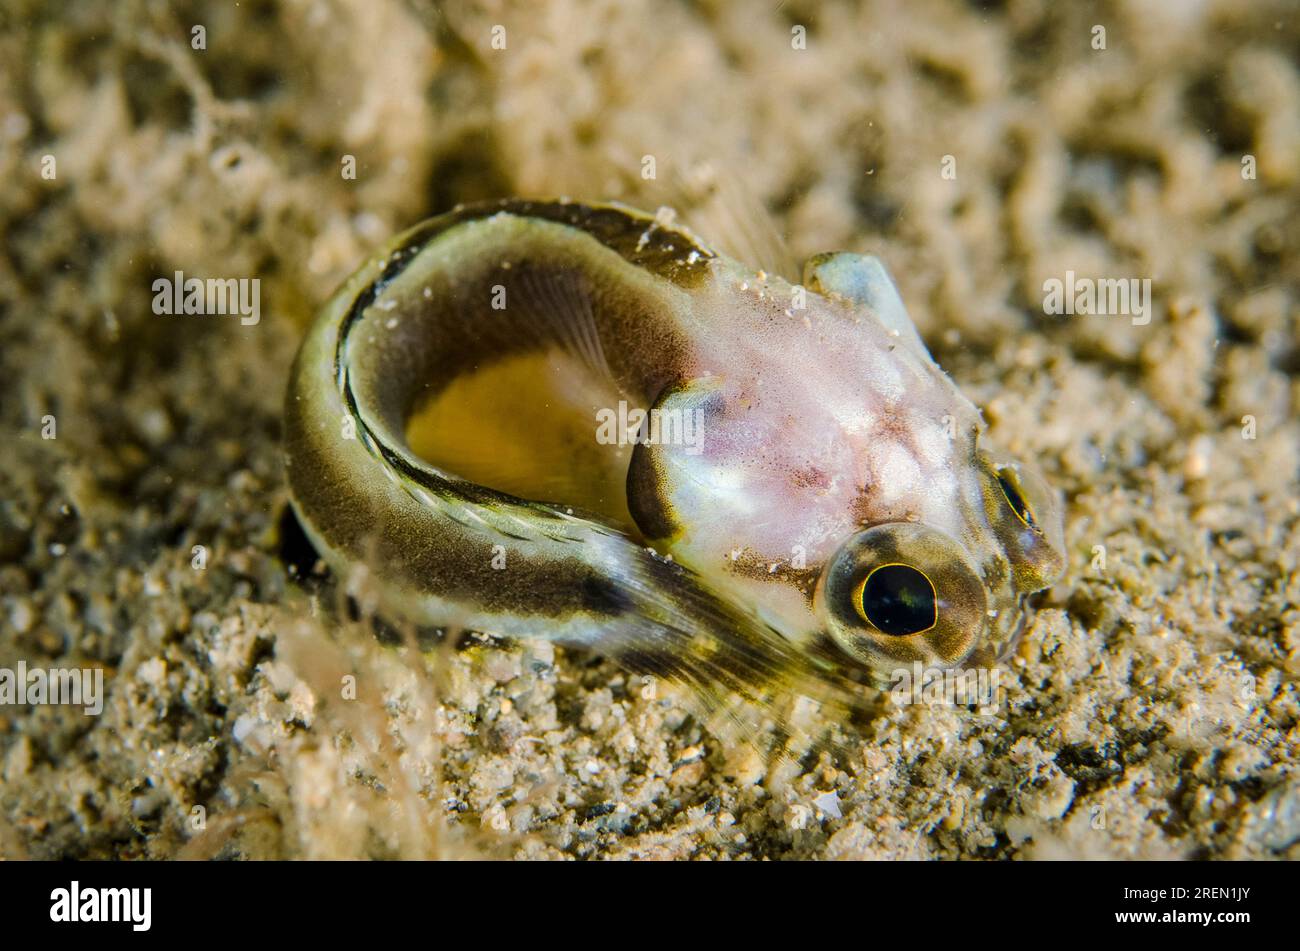 Juvenile Harlequin Jawfish, Stalix histrio, coiled up on sand, Night dive, Dili Rock East dive site, Dili, East Timor Stock Photo